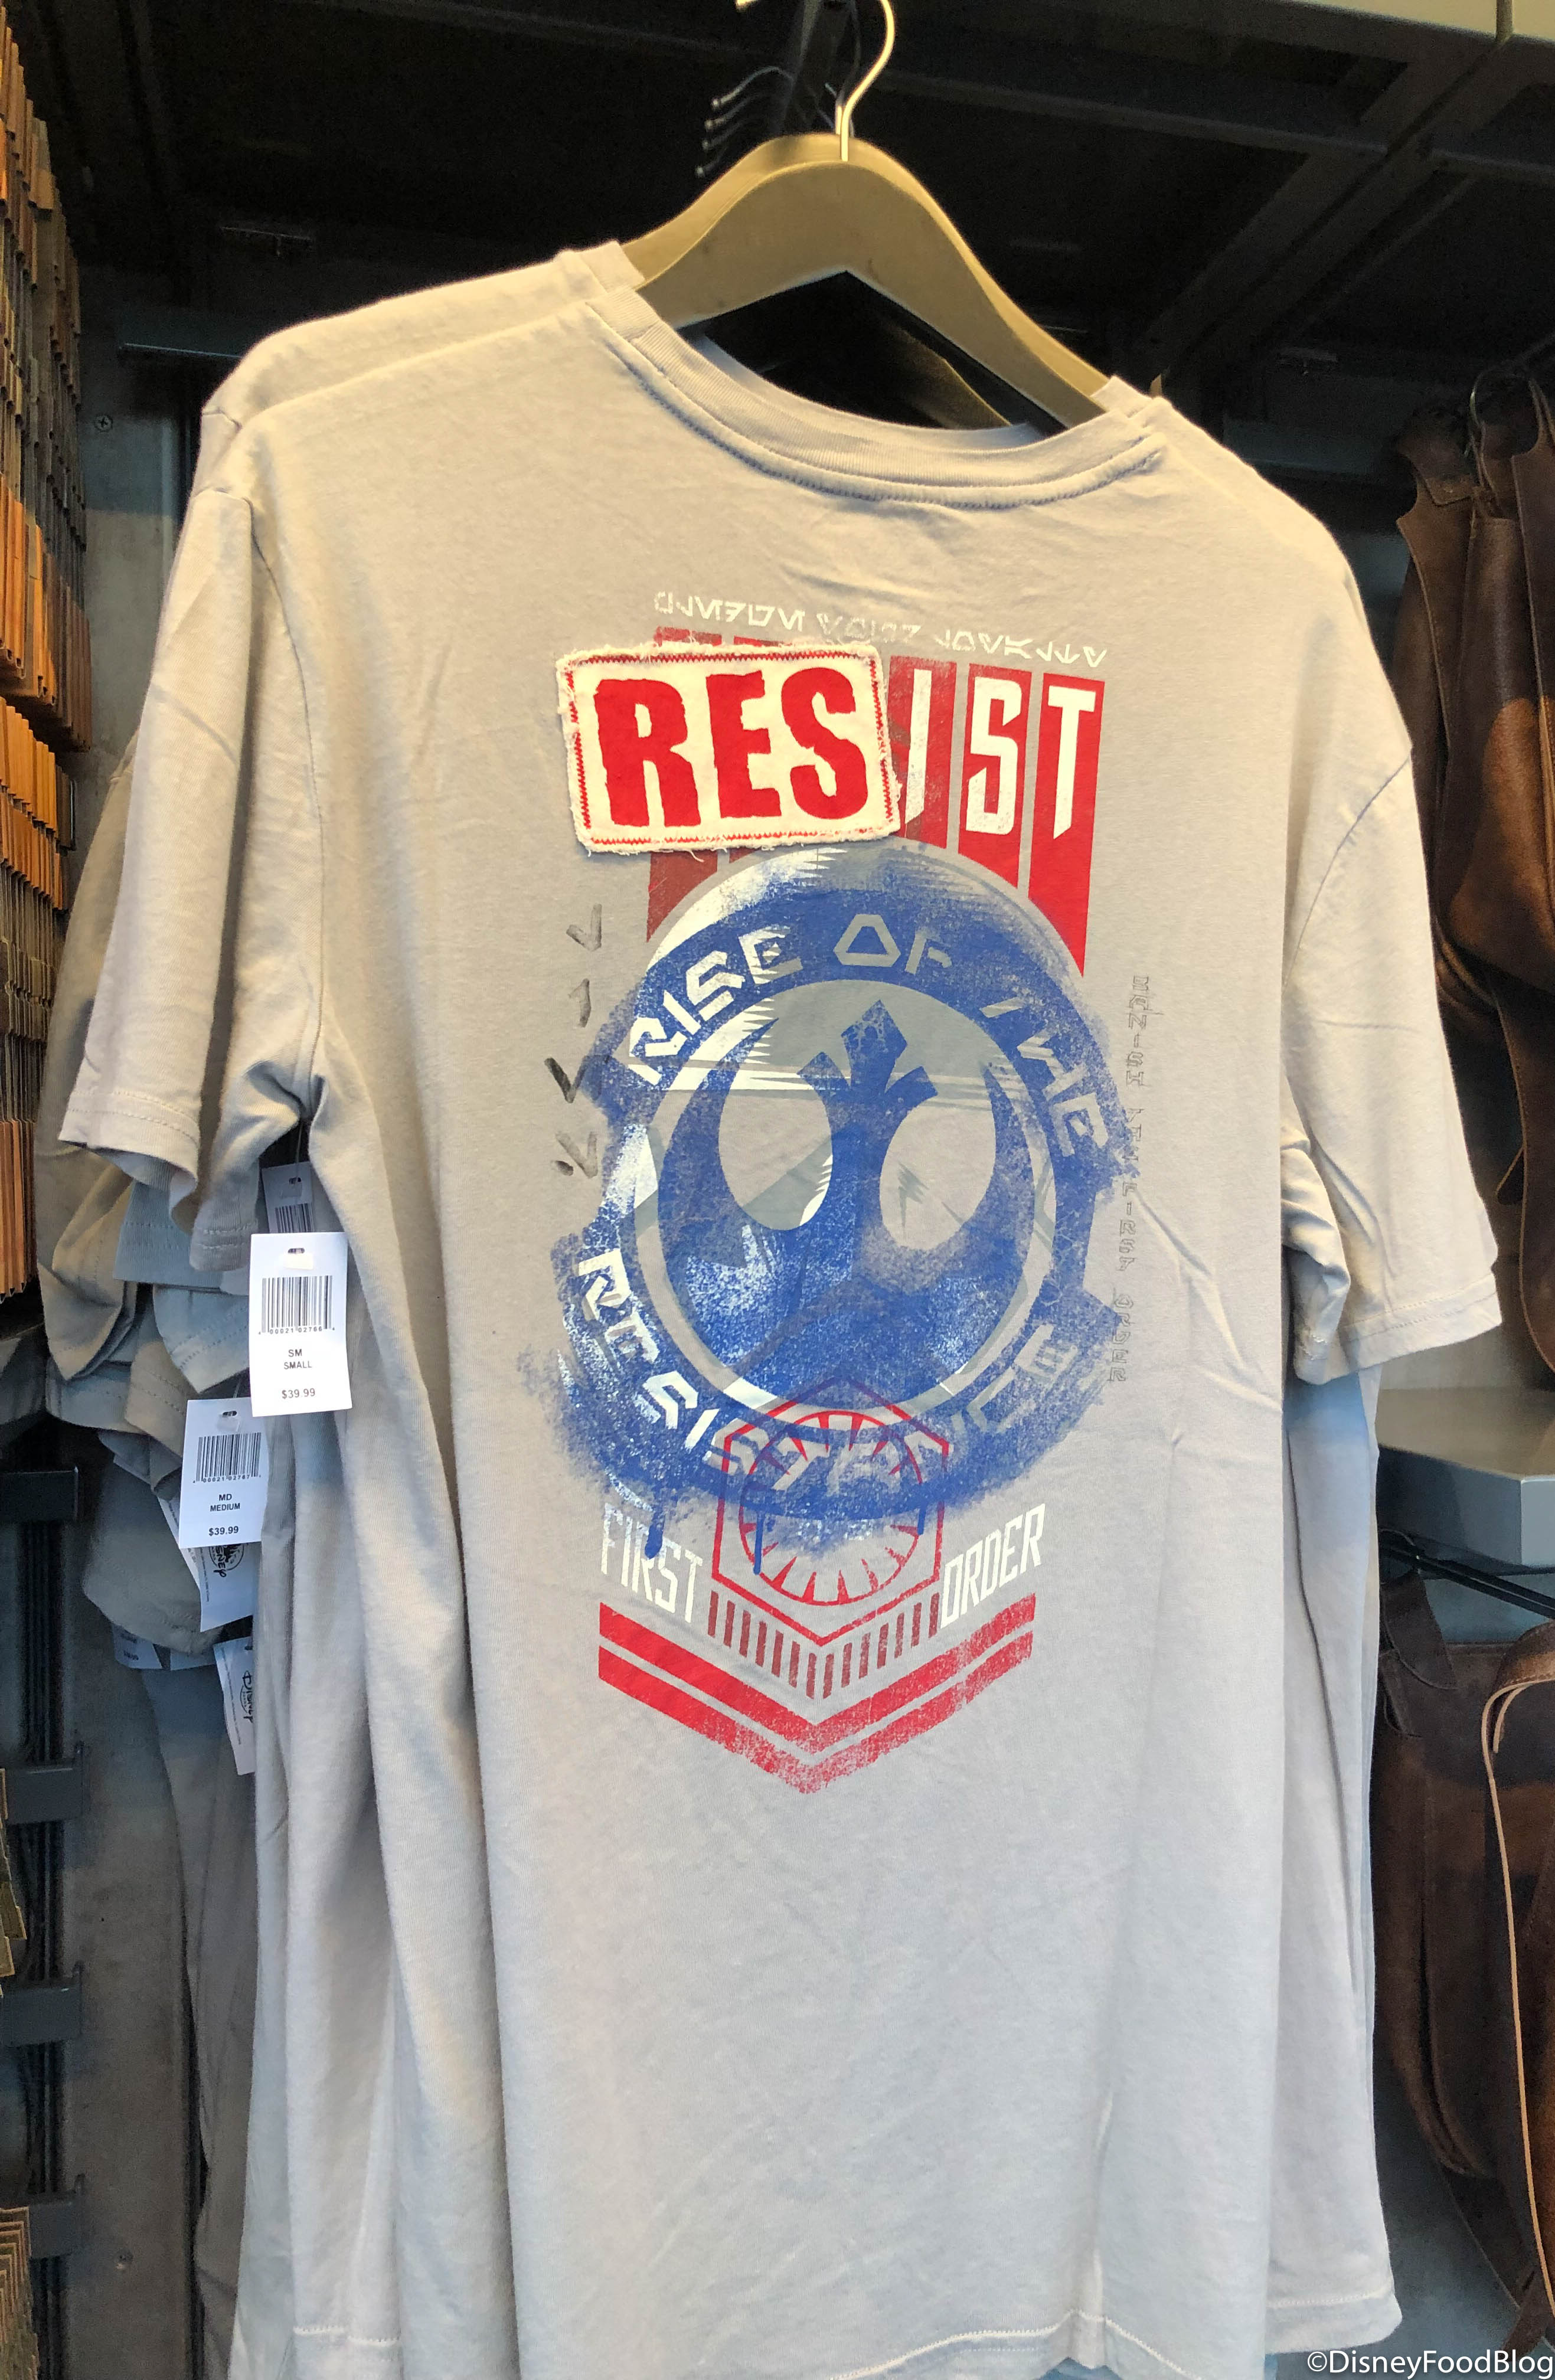 Join the Resistance at Resistance Supply in Star Wars: Galaxy's Edge ...